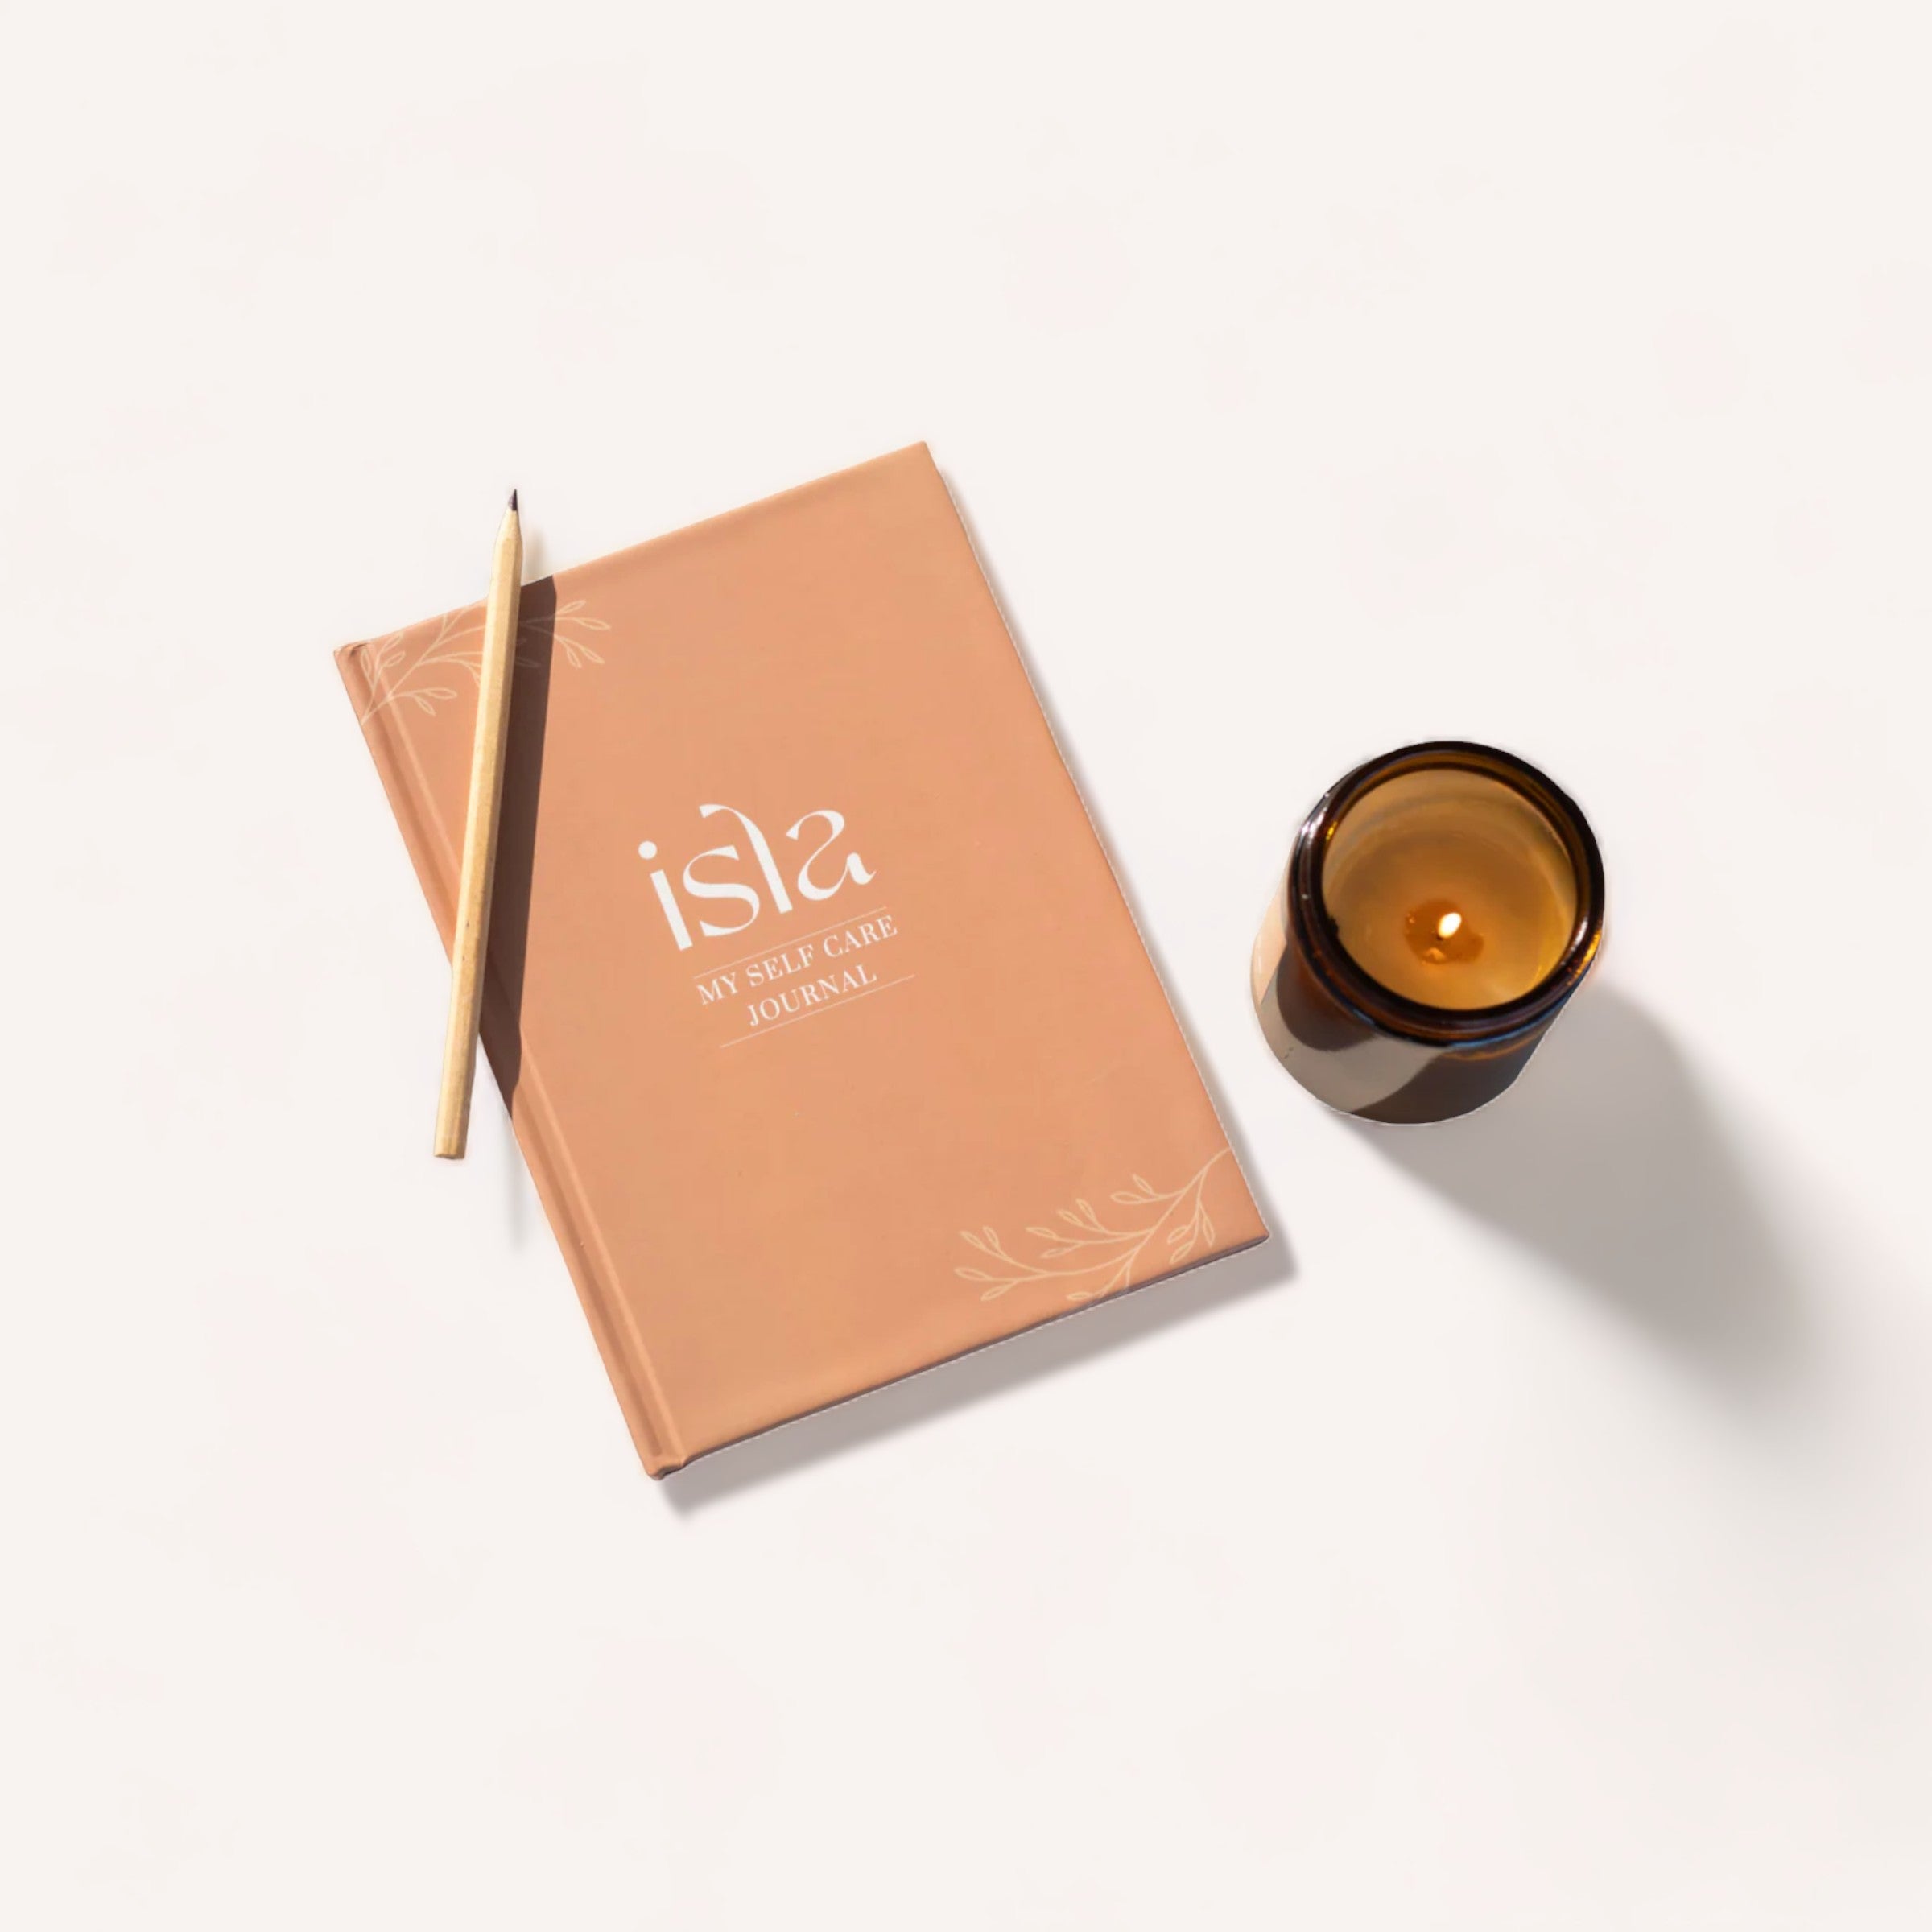 A peach-colored Skye self-care journal planner with a pencil on top lies next to a lit scented candle with a warm amber glow, all arranged on a clean white surface, suggesting a tranquil setting for mindfulness.